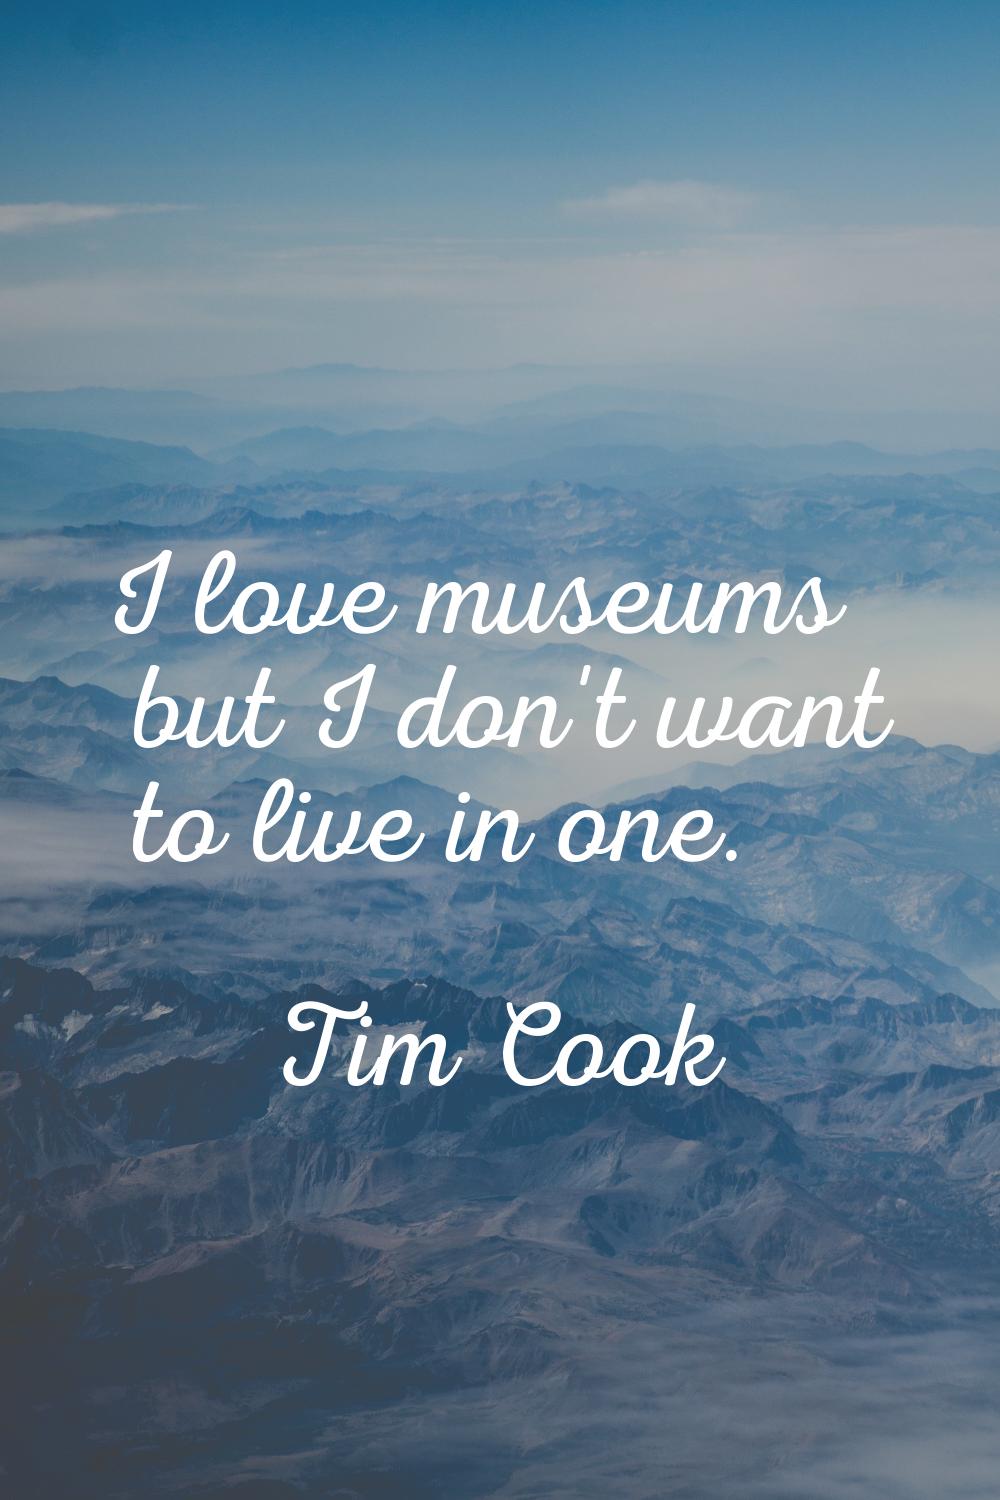 I love museums but I don't want to live in one.